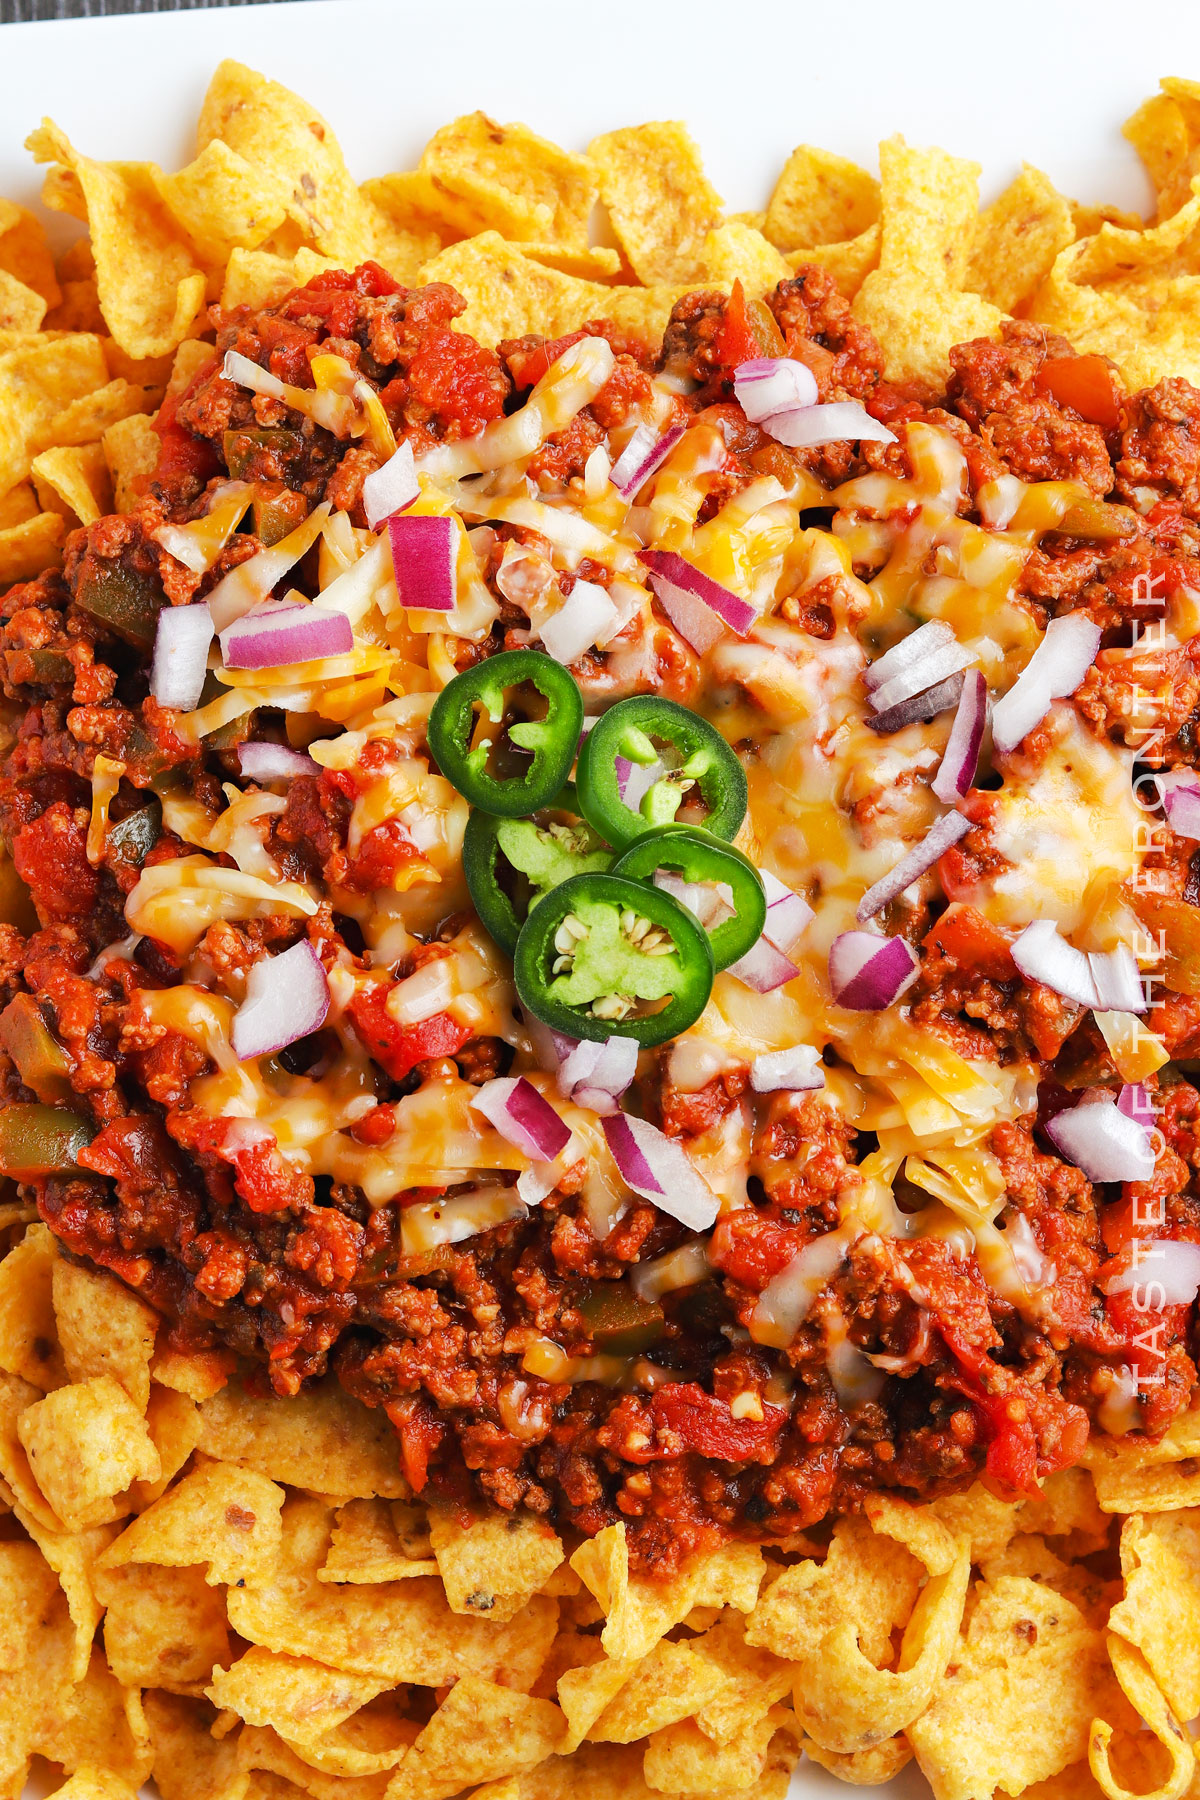 Frito chips with nacho beef